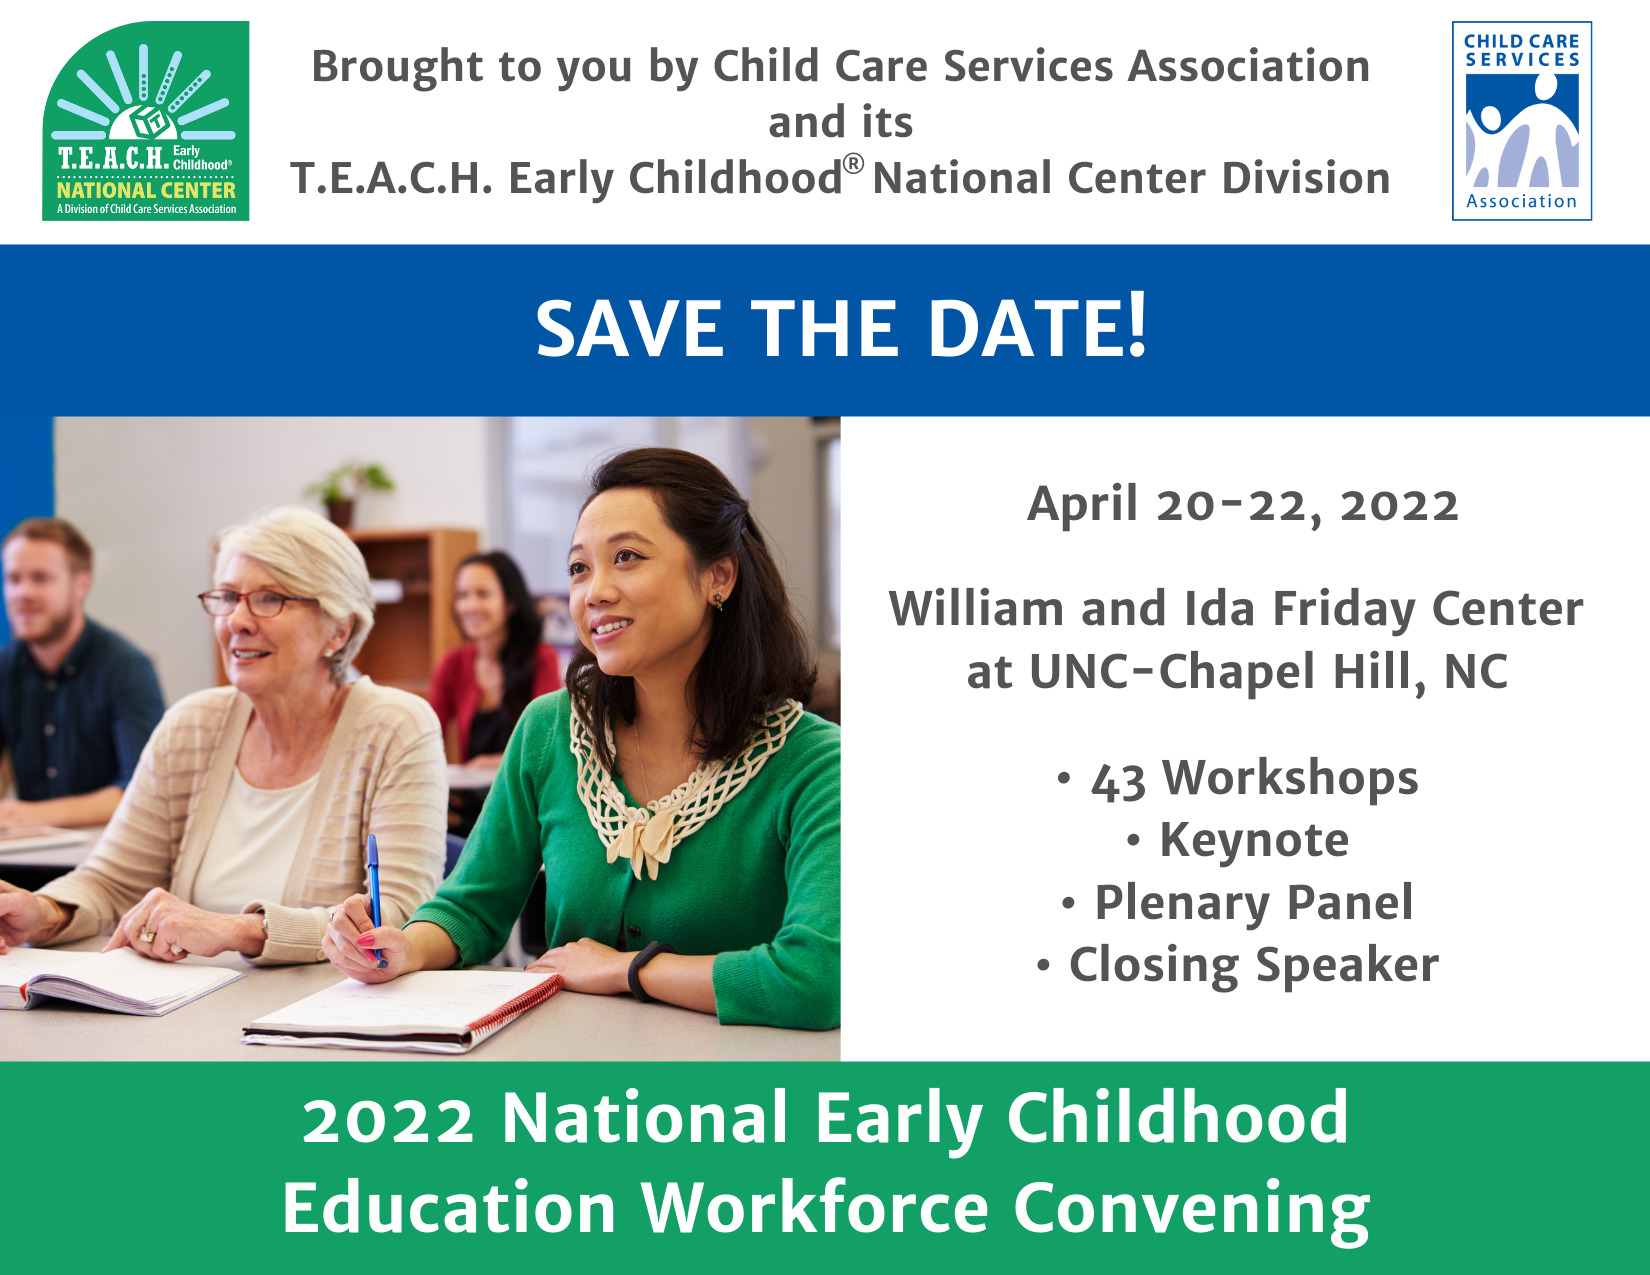 Save the Date! Join us at the 2022 Early Childhood Education Workforce Convening